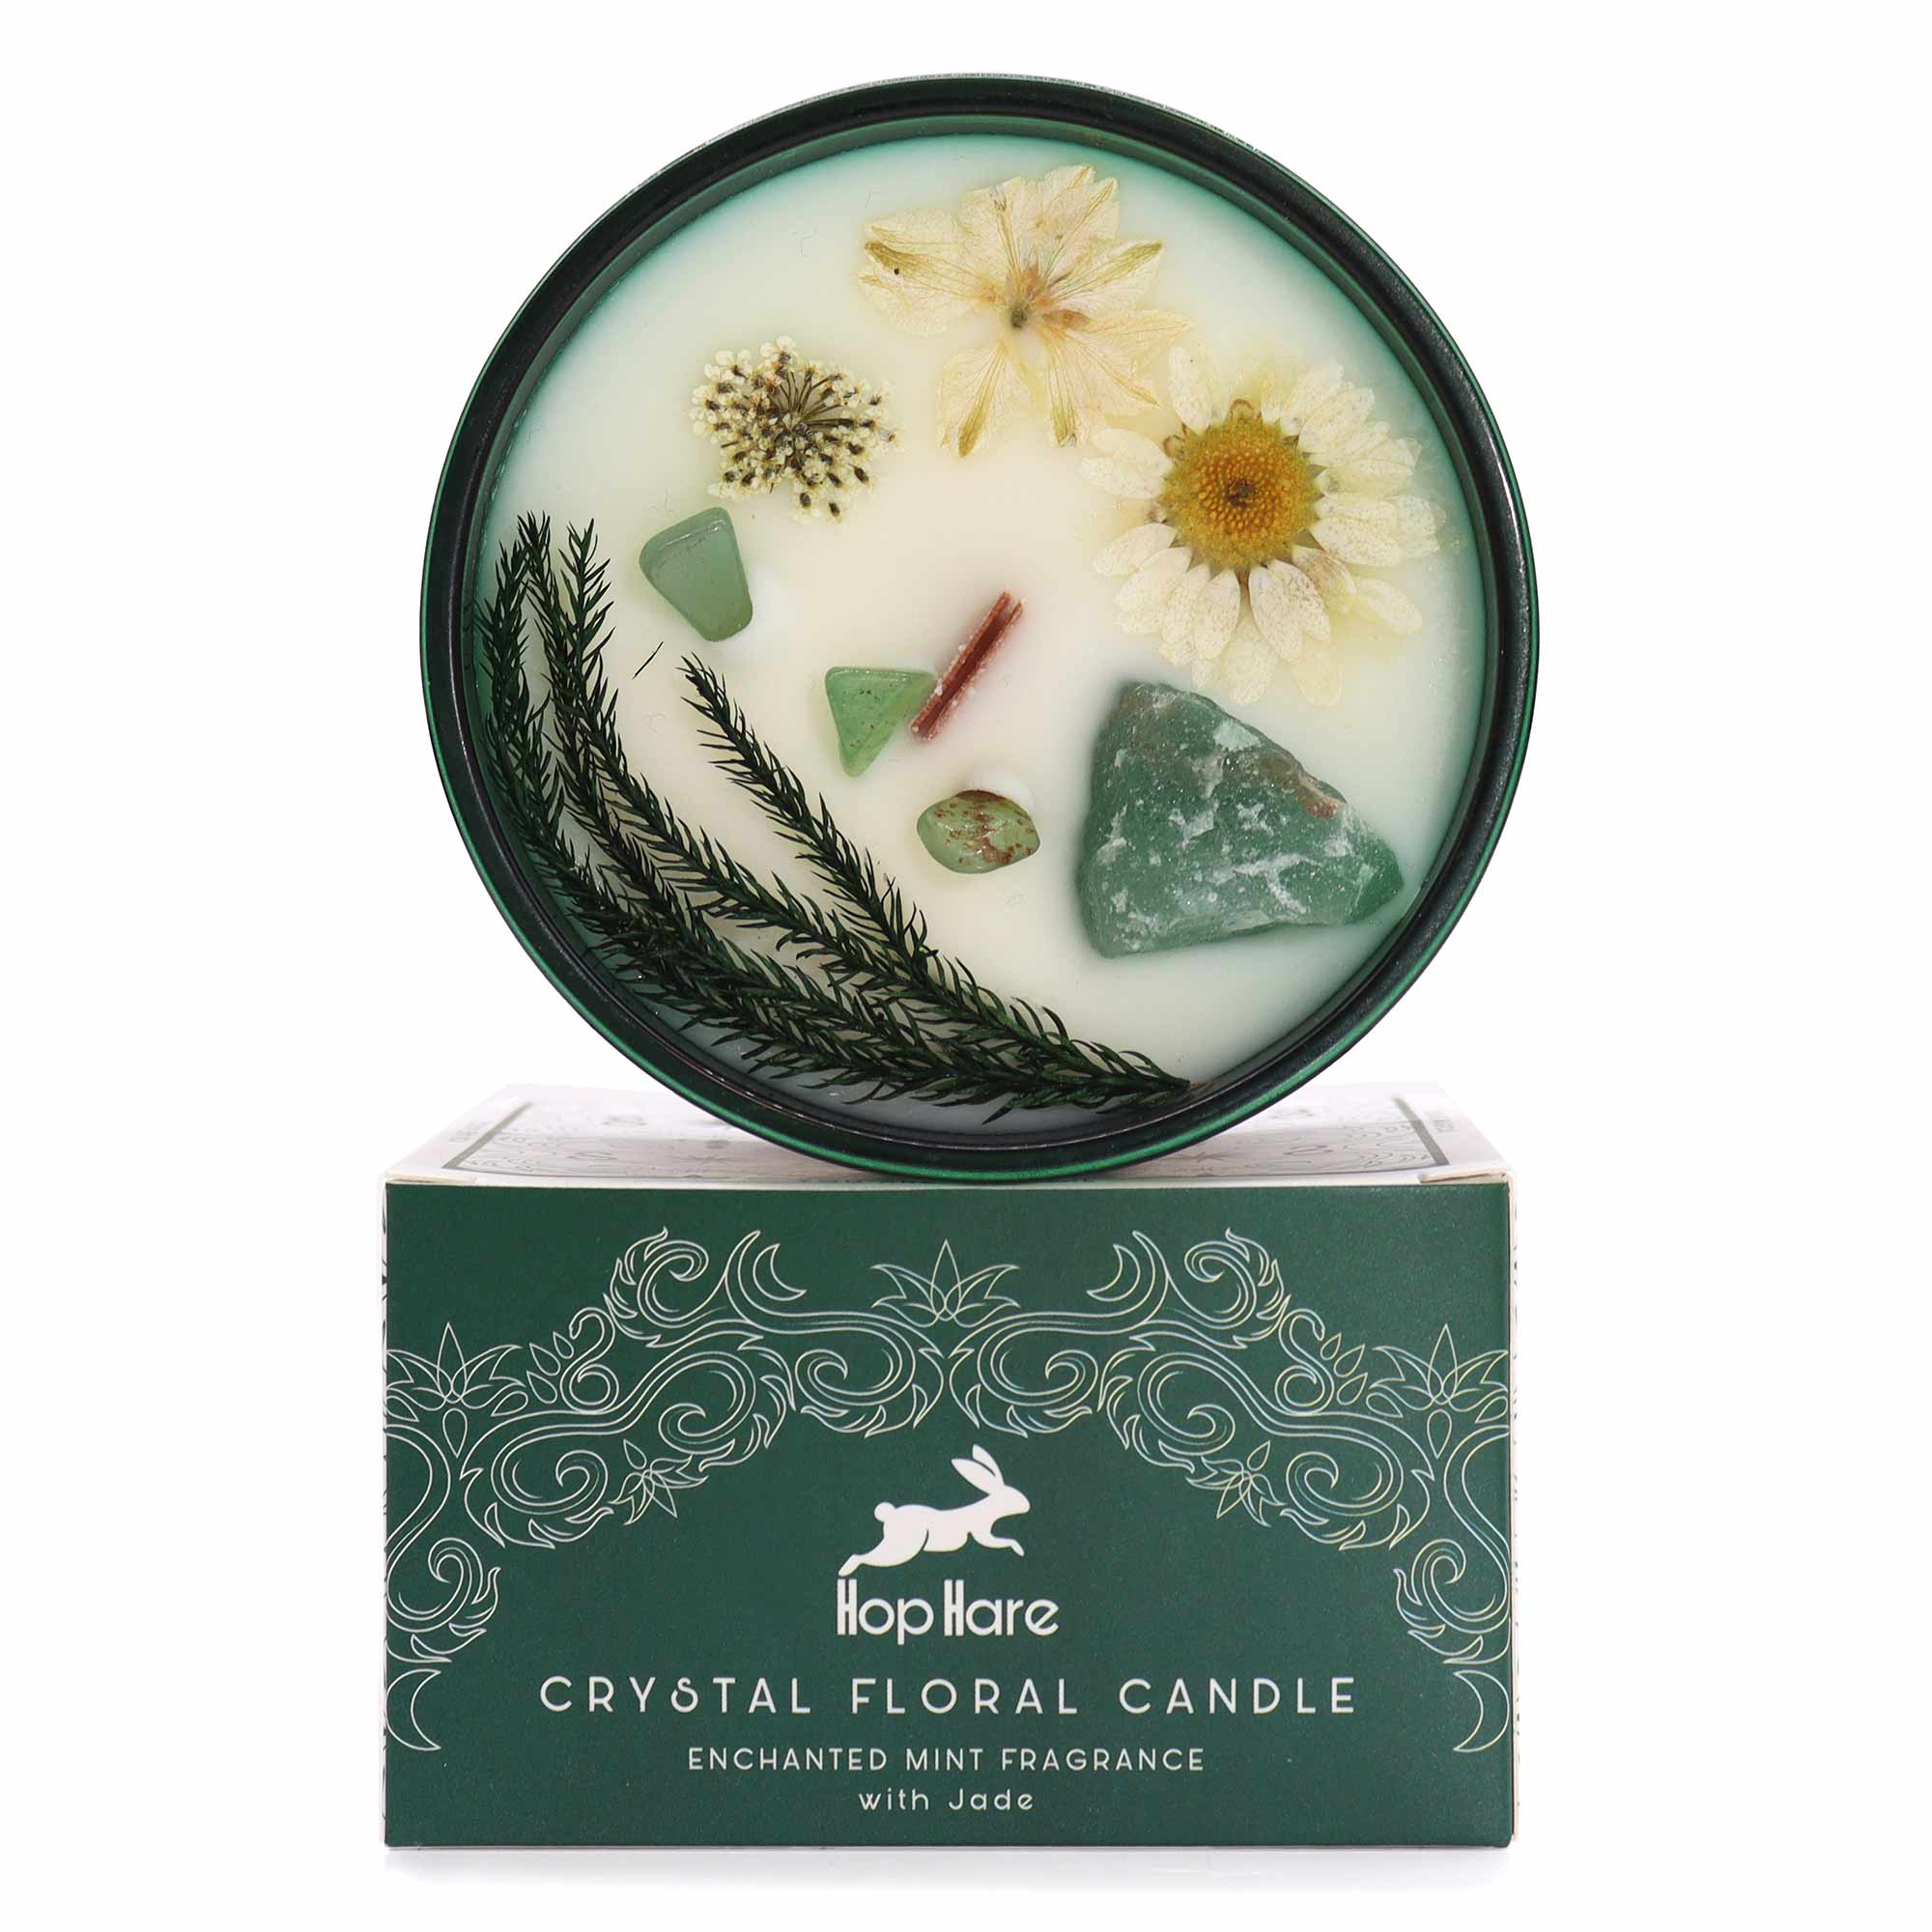 View Hop Hare Crystal Magic F10er Candle The Magician information